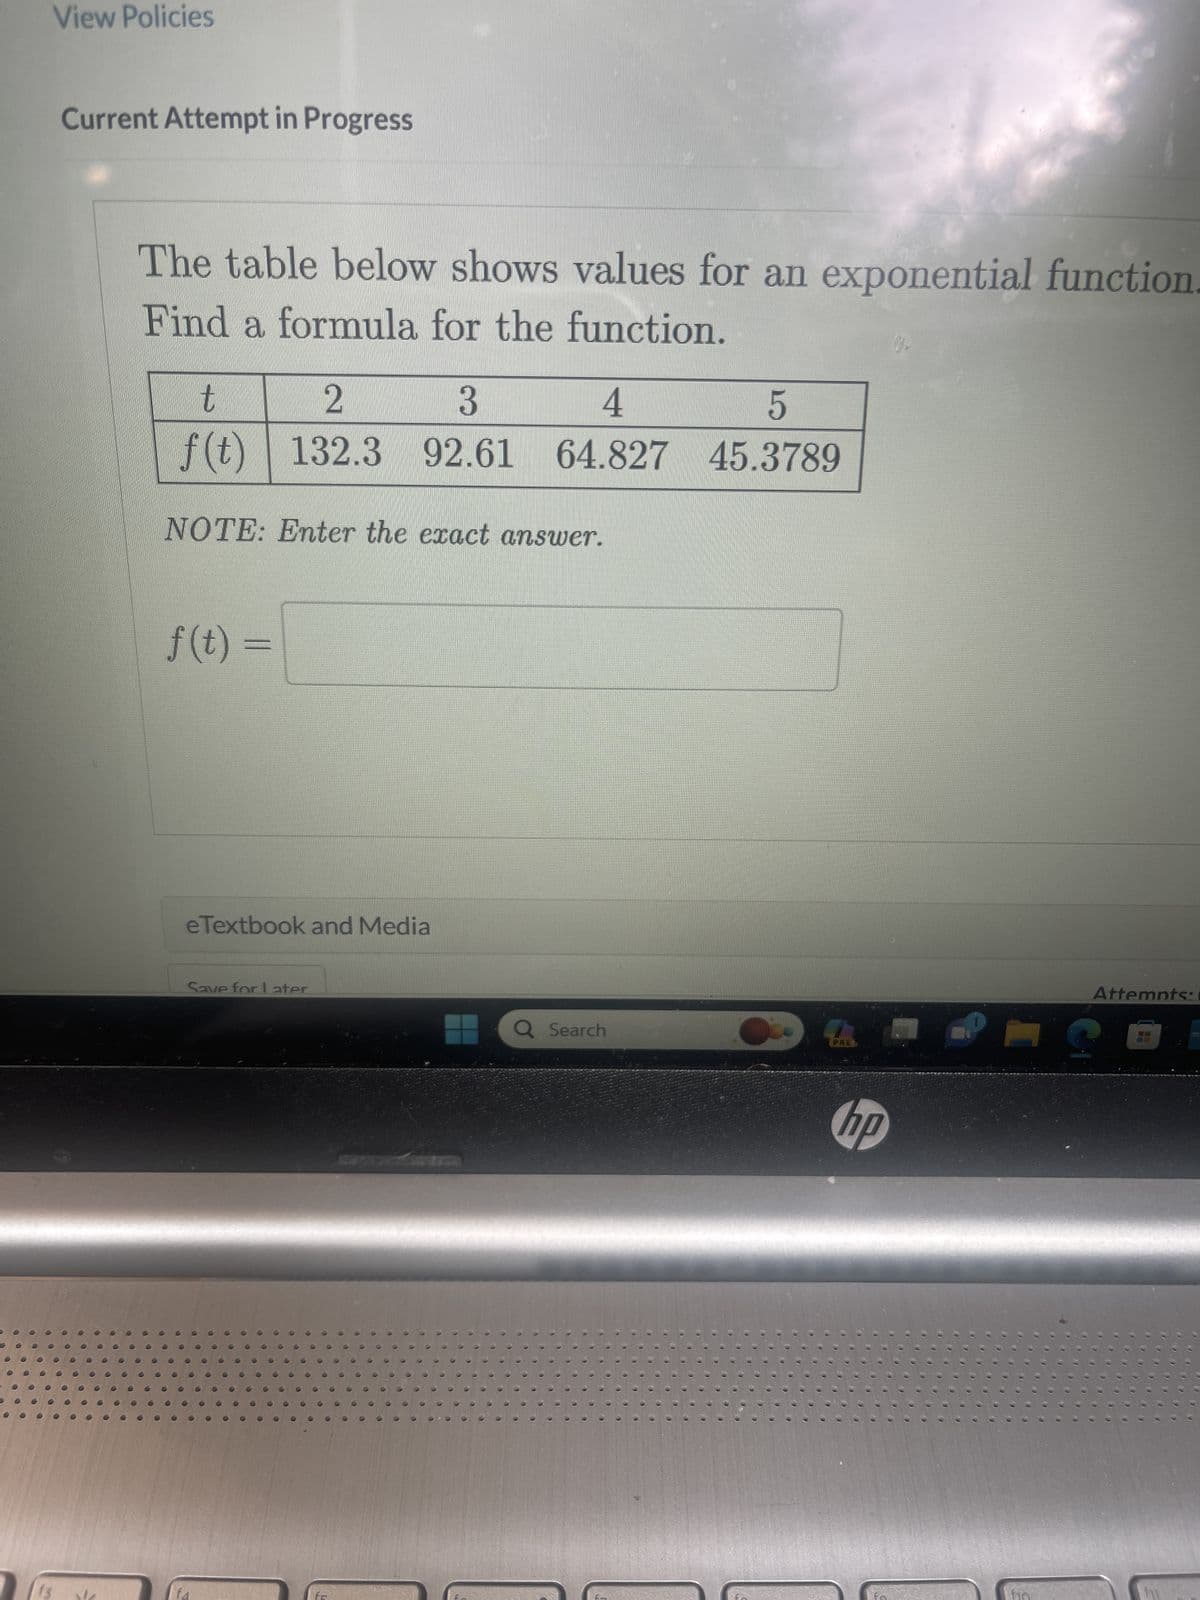 ●●
00
000
View Policies
Current Attempt in Progress
The table below shows values for an exponential function.
Find a formula for the function.
t
2
3
4
5
f(t) 132.3 92.61 64.827 45.3789
NOTE: Enter the exact answer.
f(t) =
eTextbook and Media
Save for Later
Q Search
PRES
hp
Attempts: 1
12